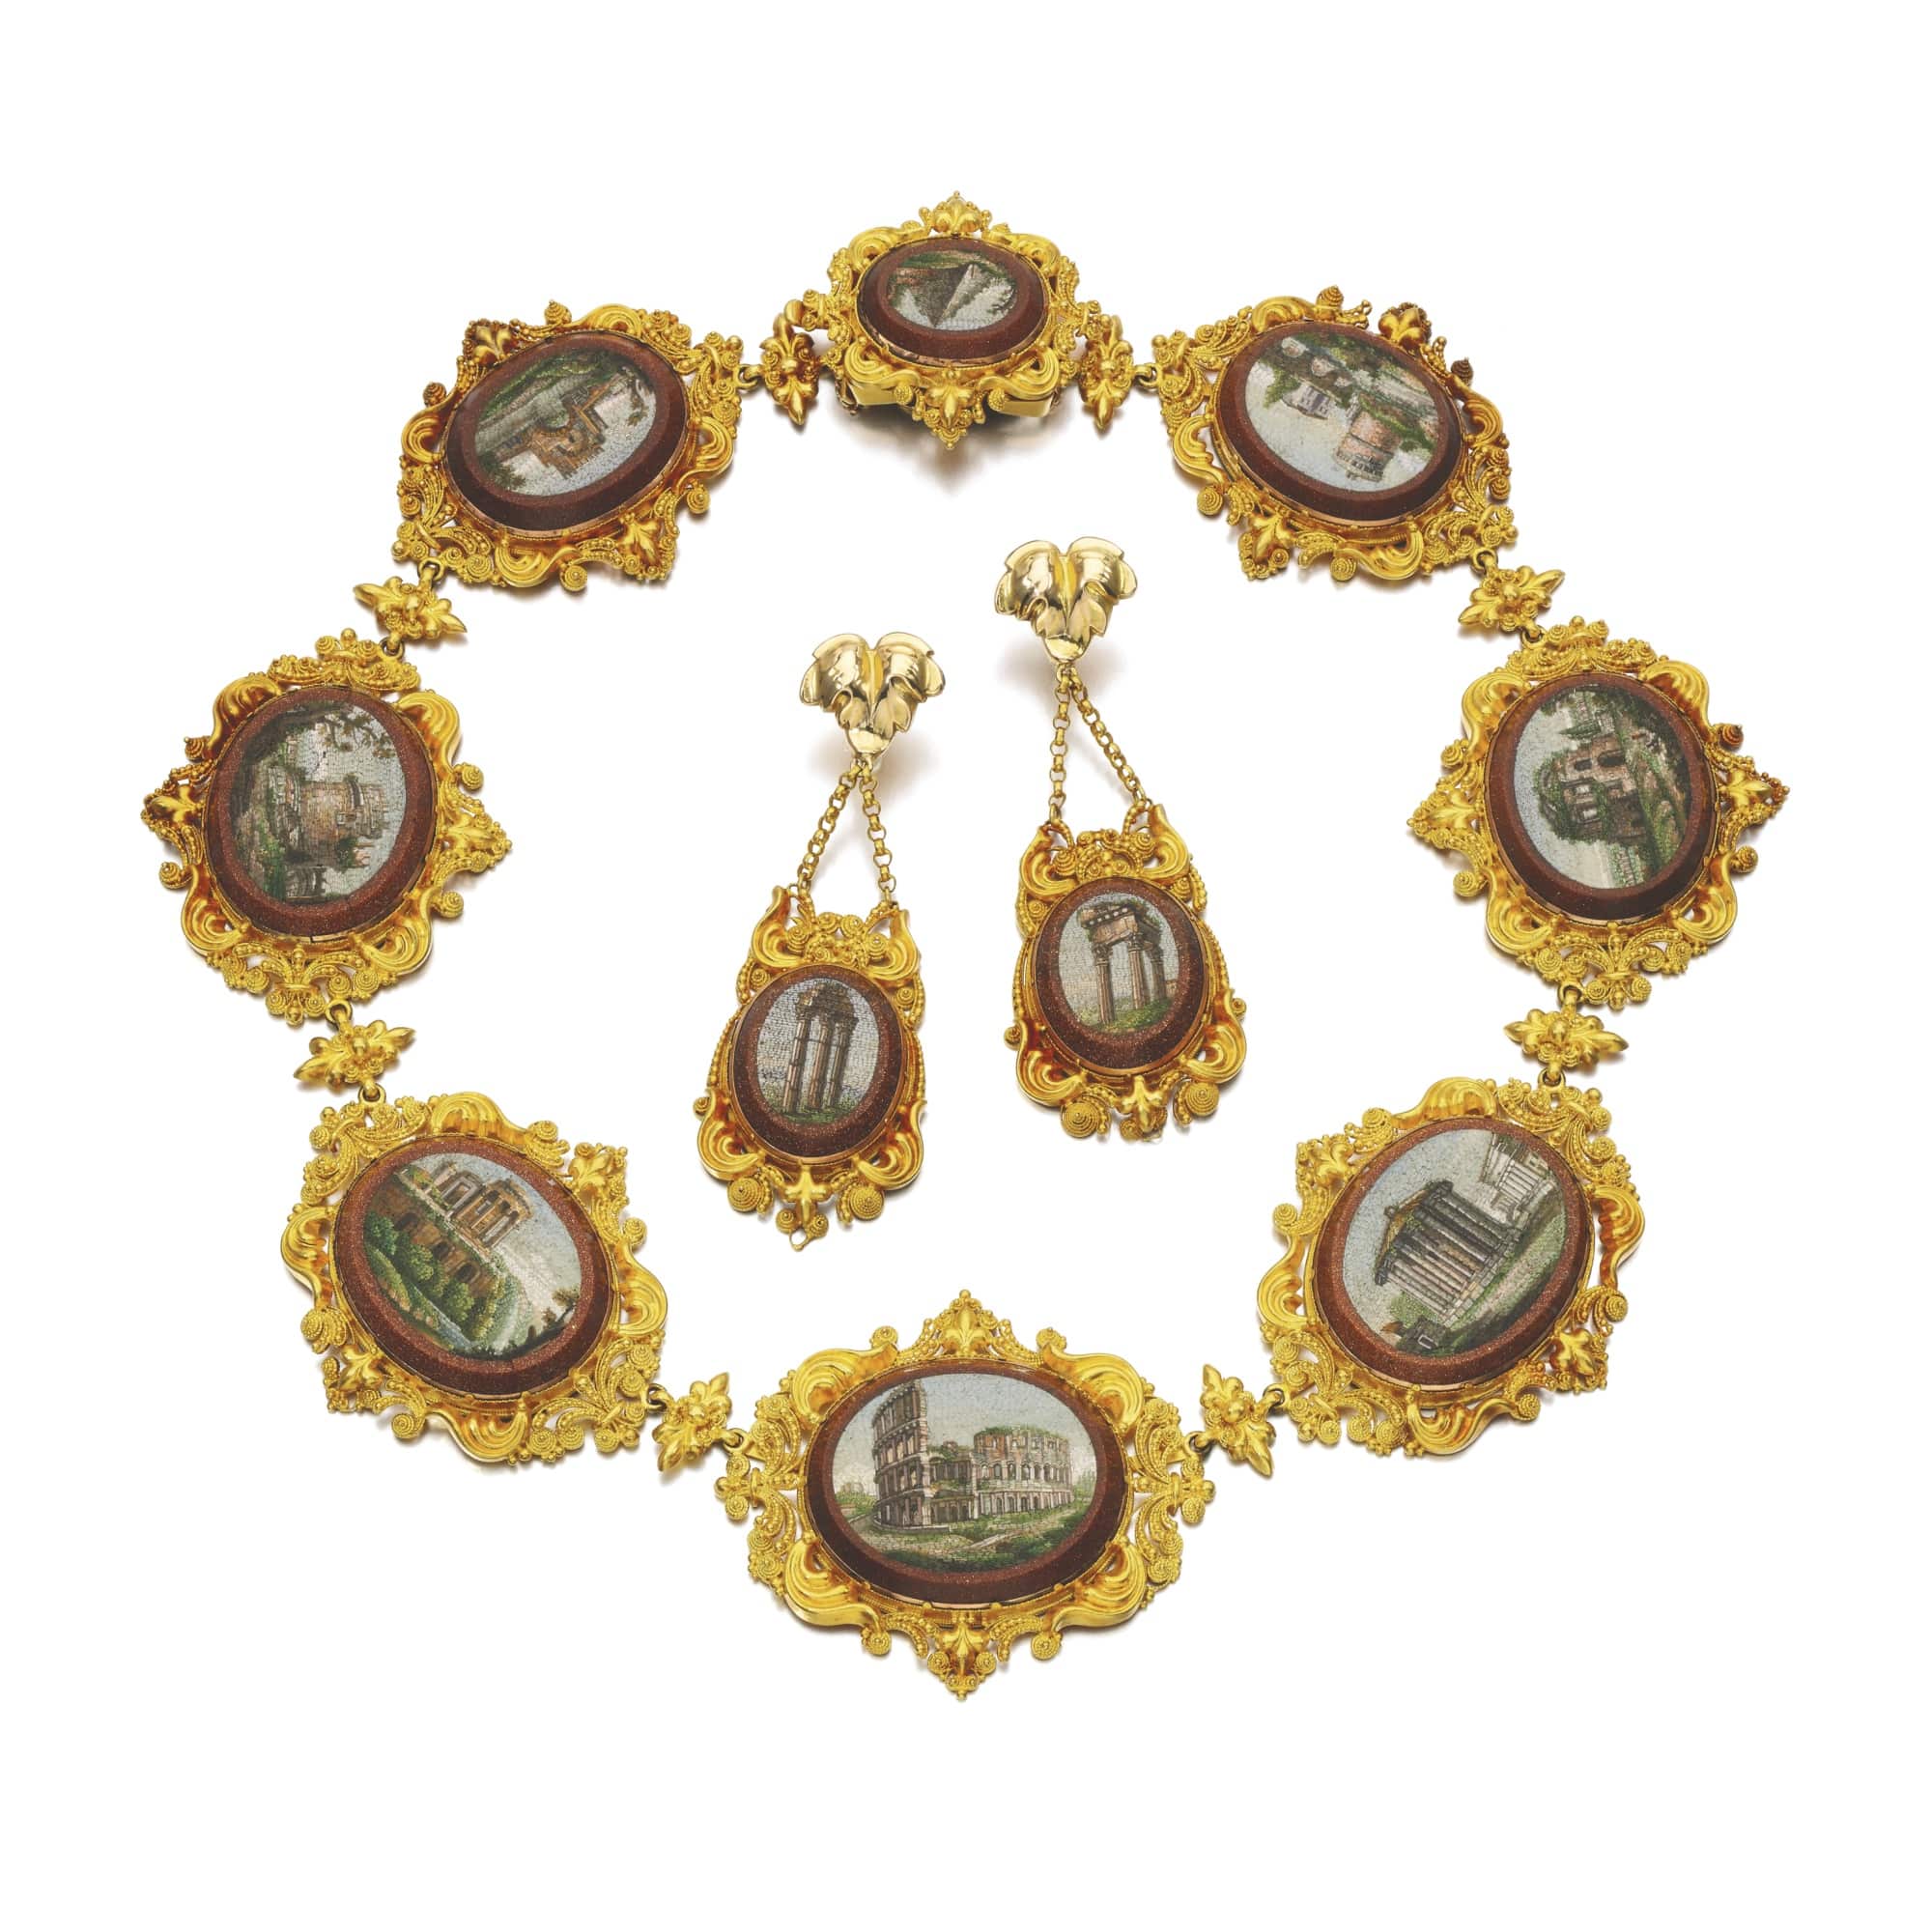 Micromosaic and Gold Demi-Parure, c.1820s. Photo Courtesy of Sotheby’s.